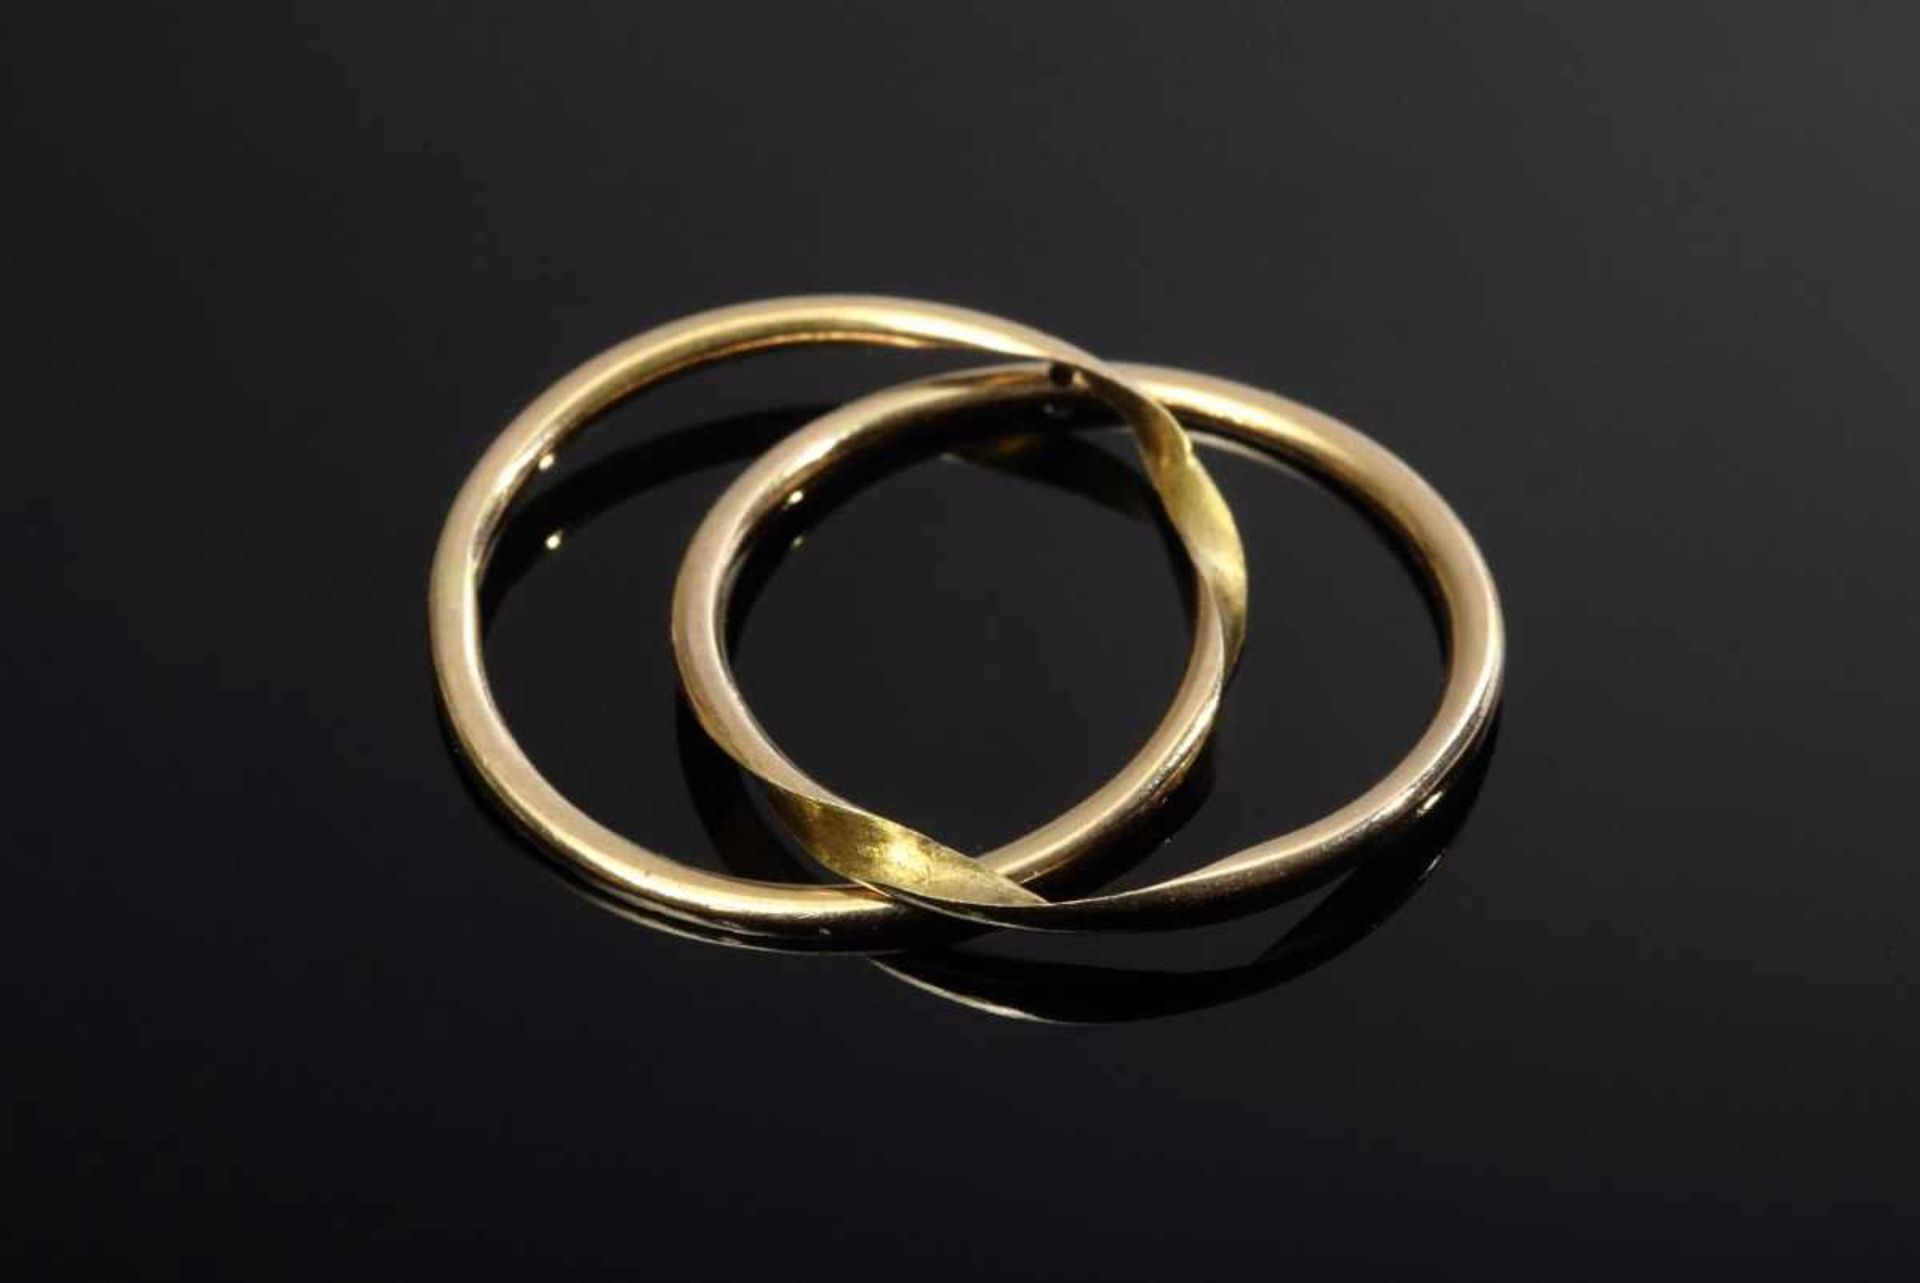 Museum twin/interlocking ring made of 2 hoops, which together form a ring rail, inside memorial